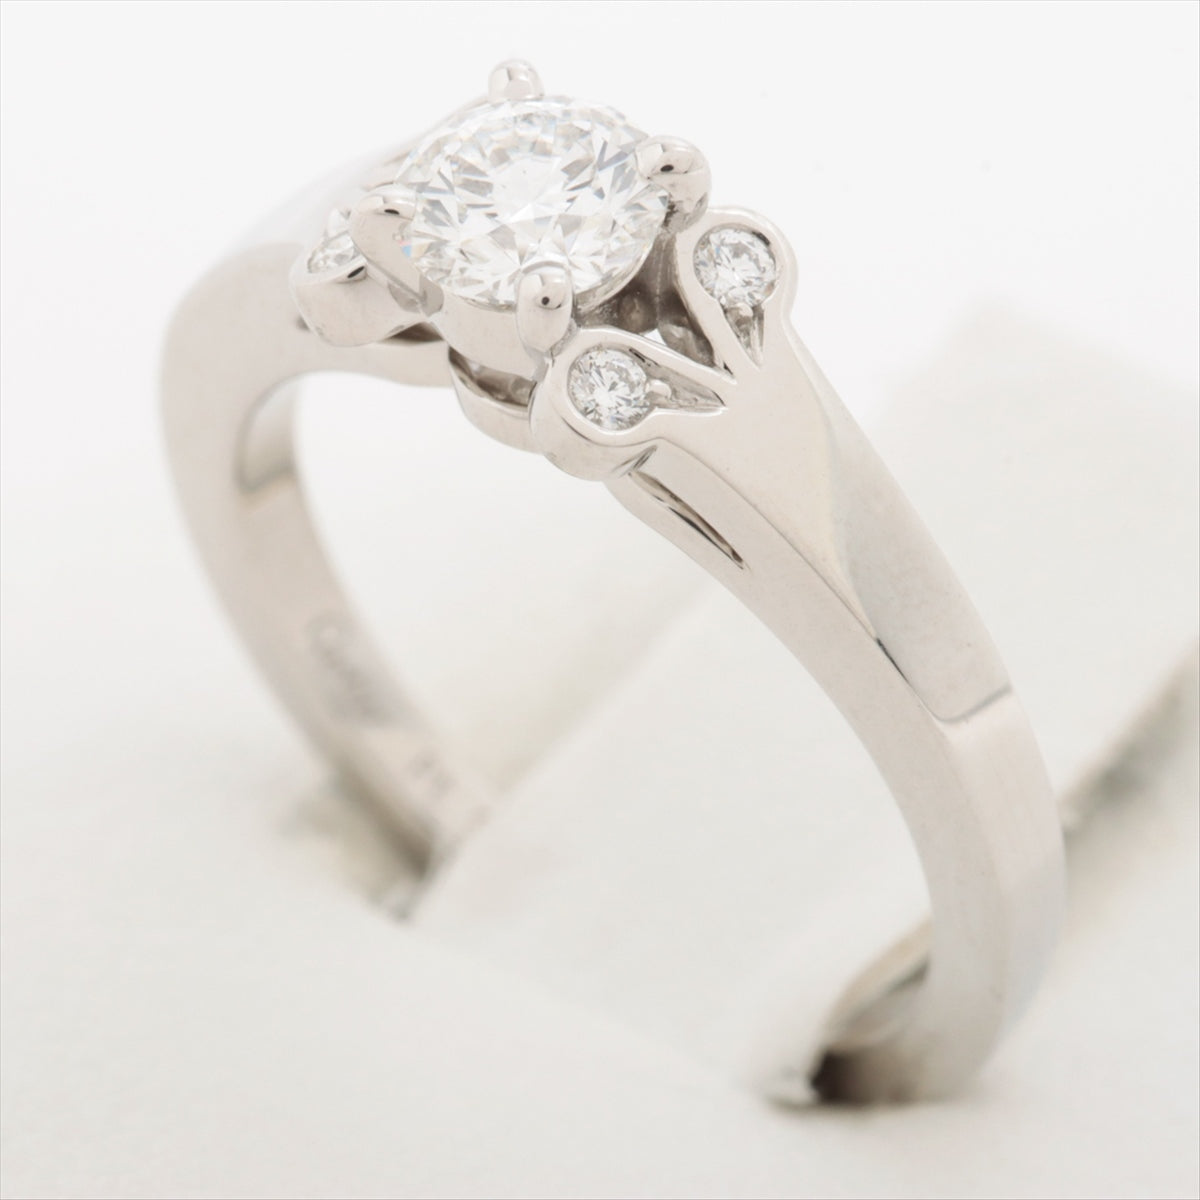 Cartier Ballerina Diamond Ring Pt950 4.4g 0.33 F VVS1 EX NONE 46 Published by GIA in 2012 CRN4197646